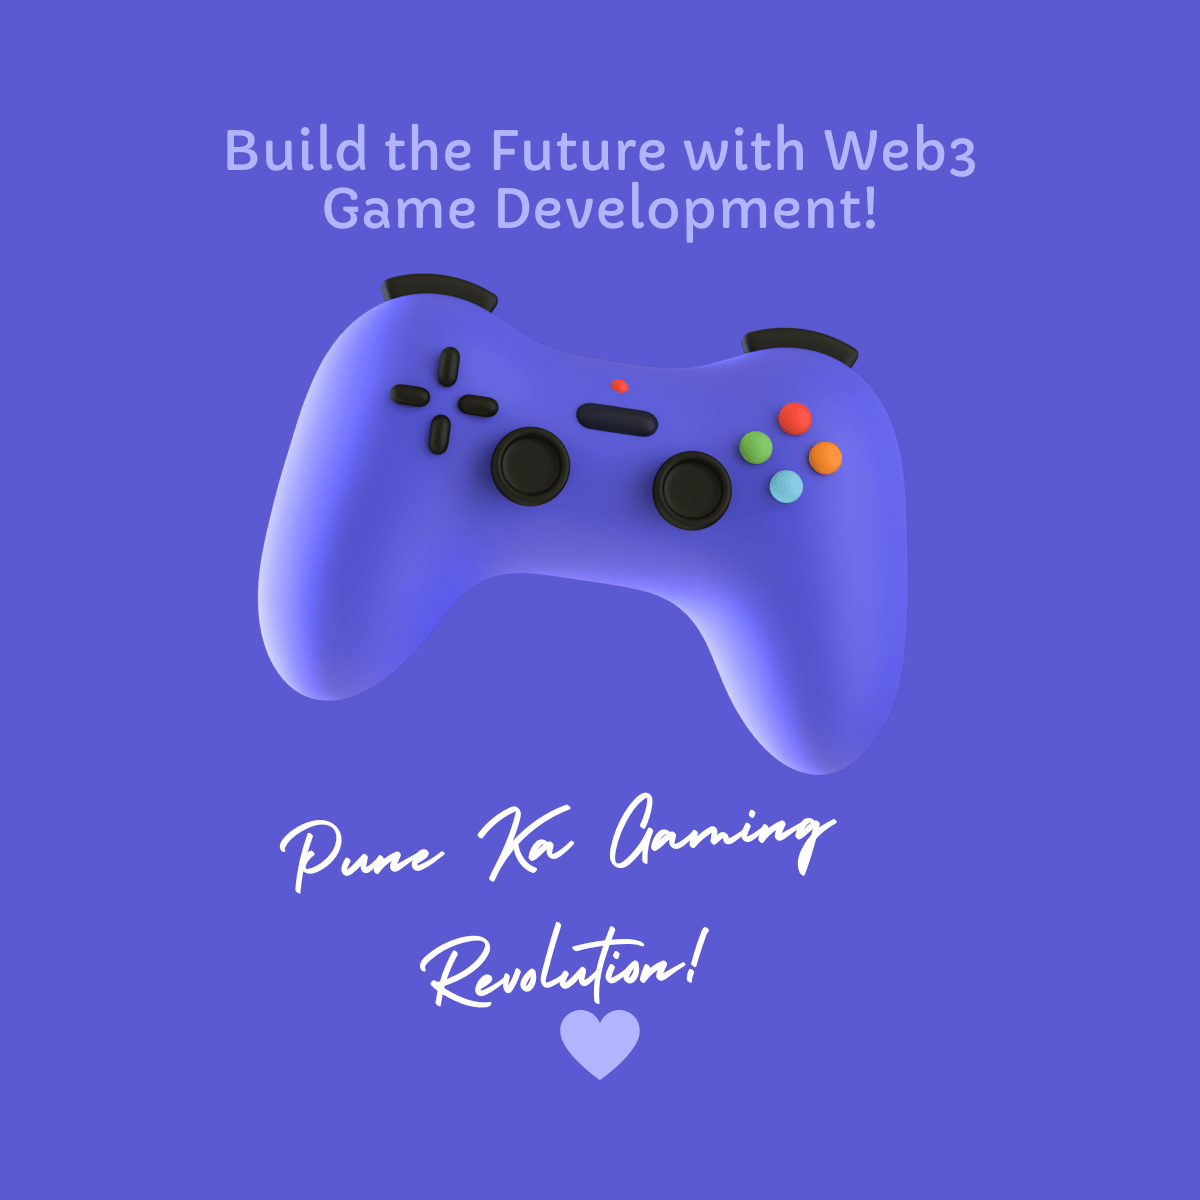 Pune Ka Gaming Revolution! Build the Future with Web3 Game Development!